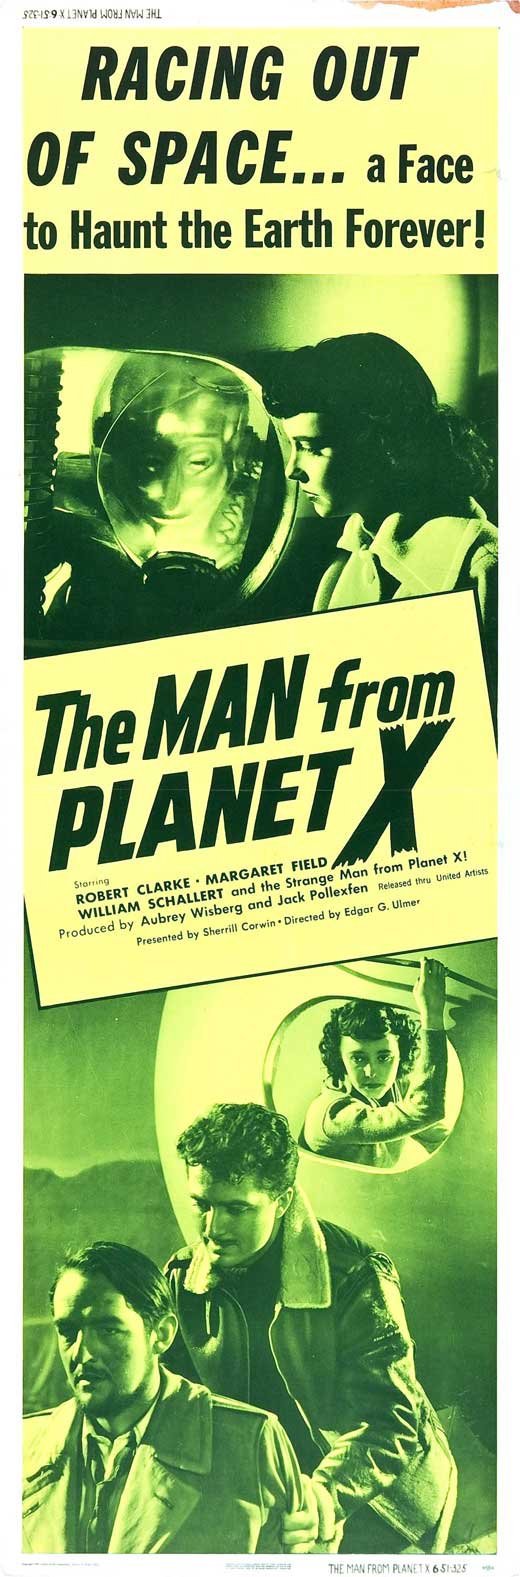 The Man from Planet X (1951) Screenshot 5